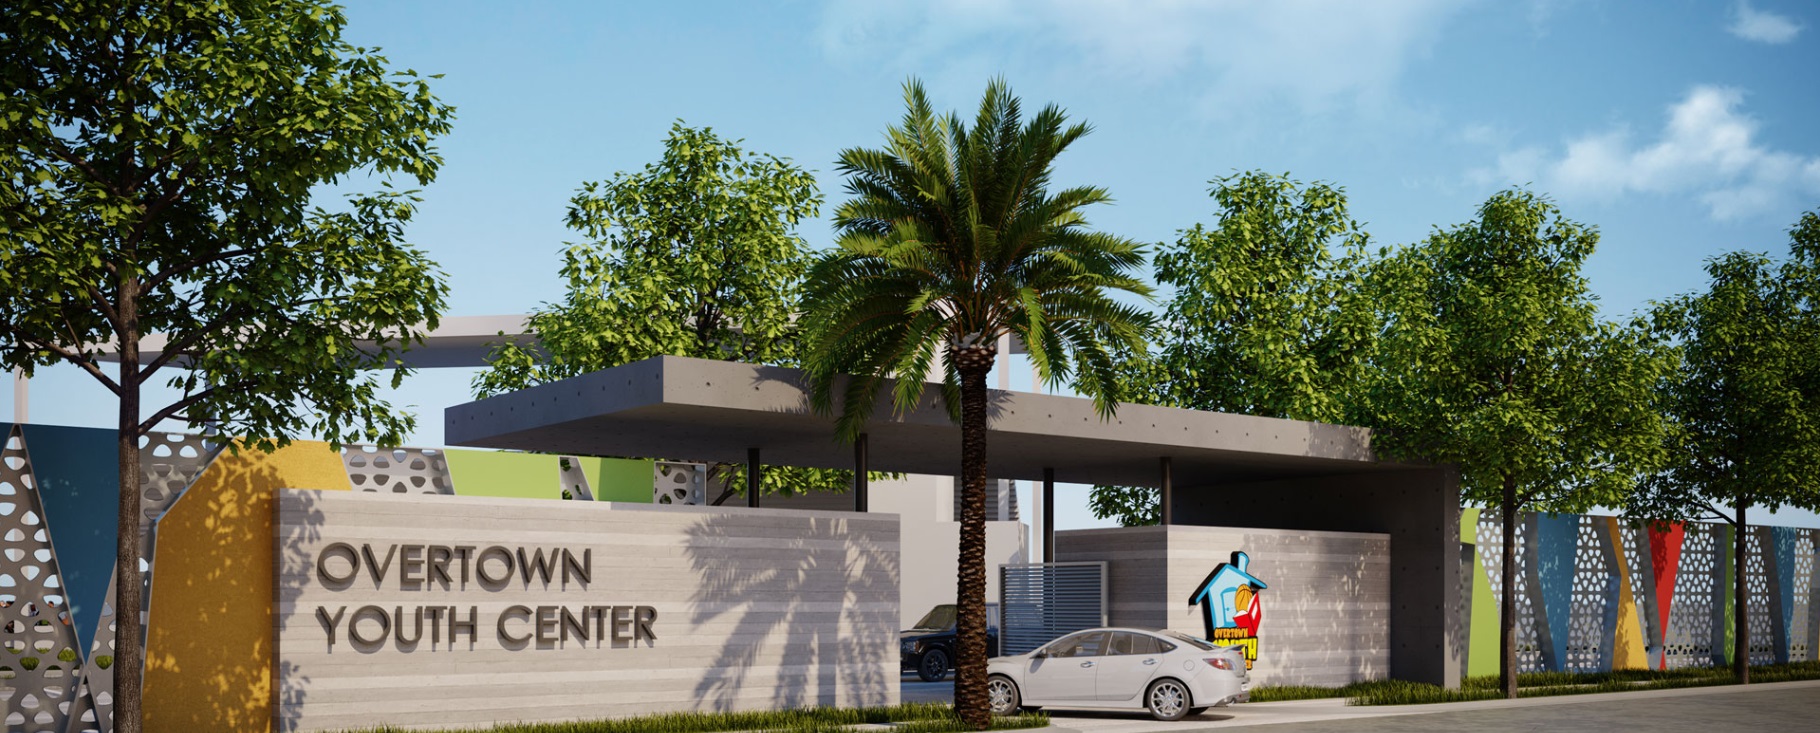 overtown-youth-ctr_promotionalmaterial_rendering2-2